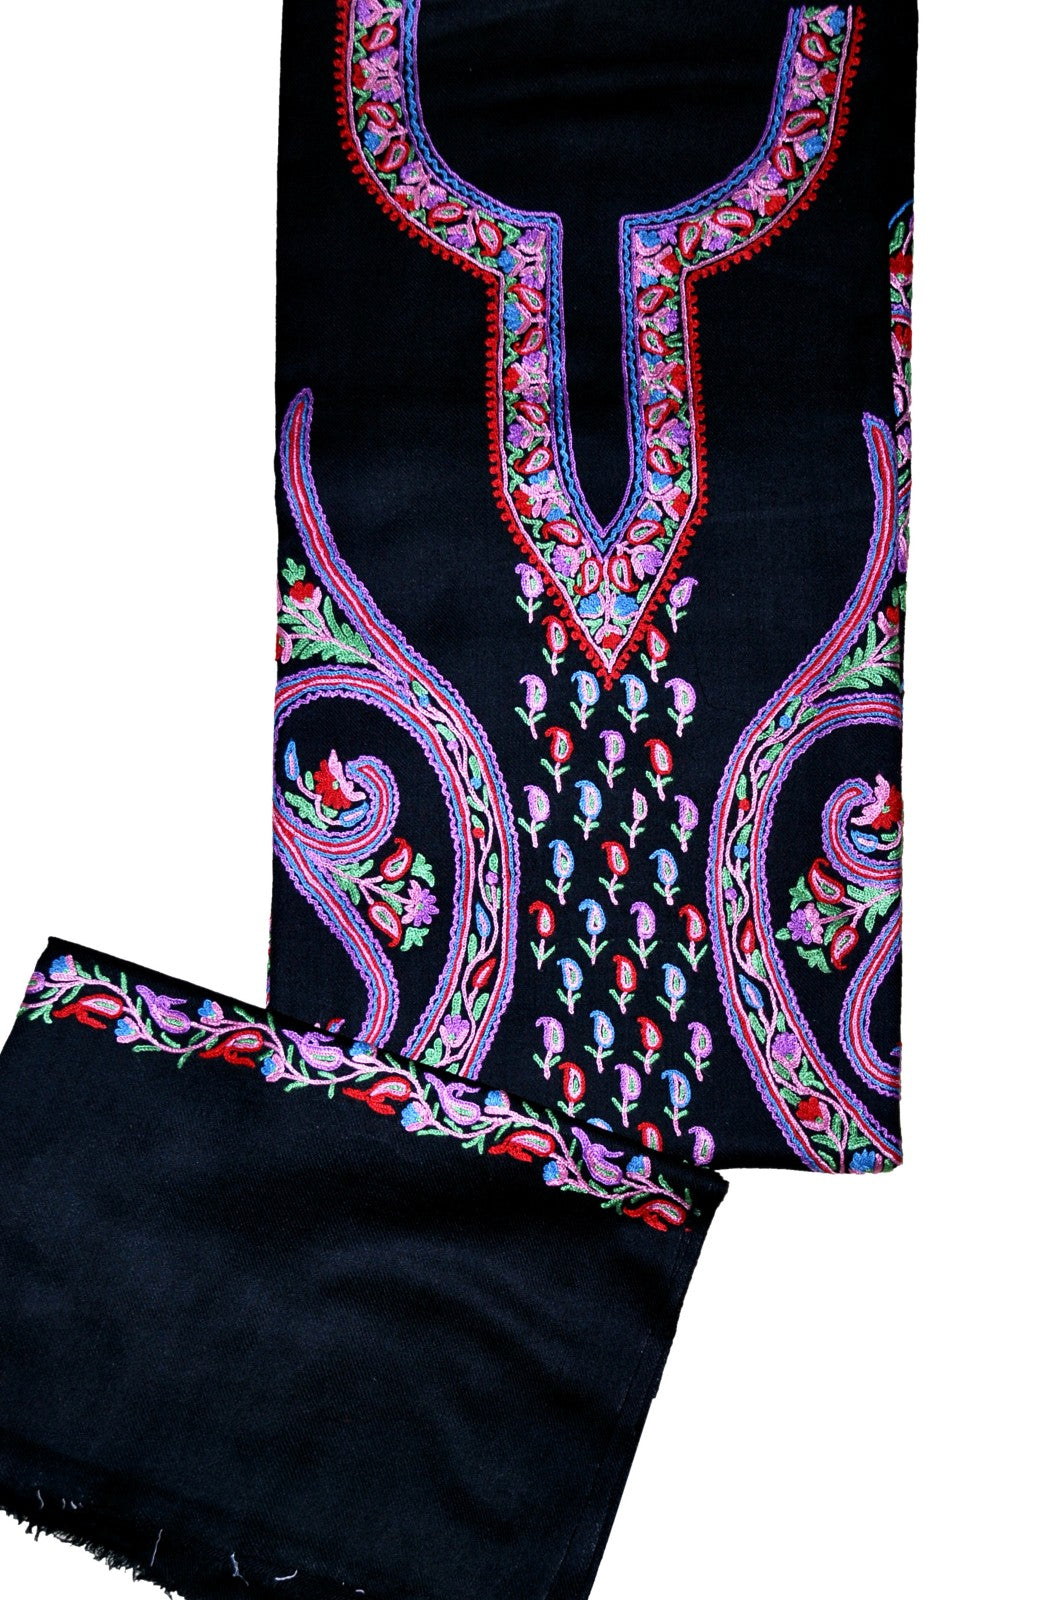 Woolen Salwar Kameez Suit Unstitched Fabric and Shawl Black, Multicolor Embroidery #FS-428